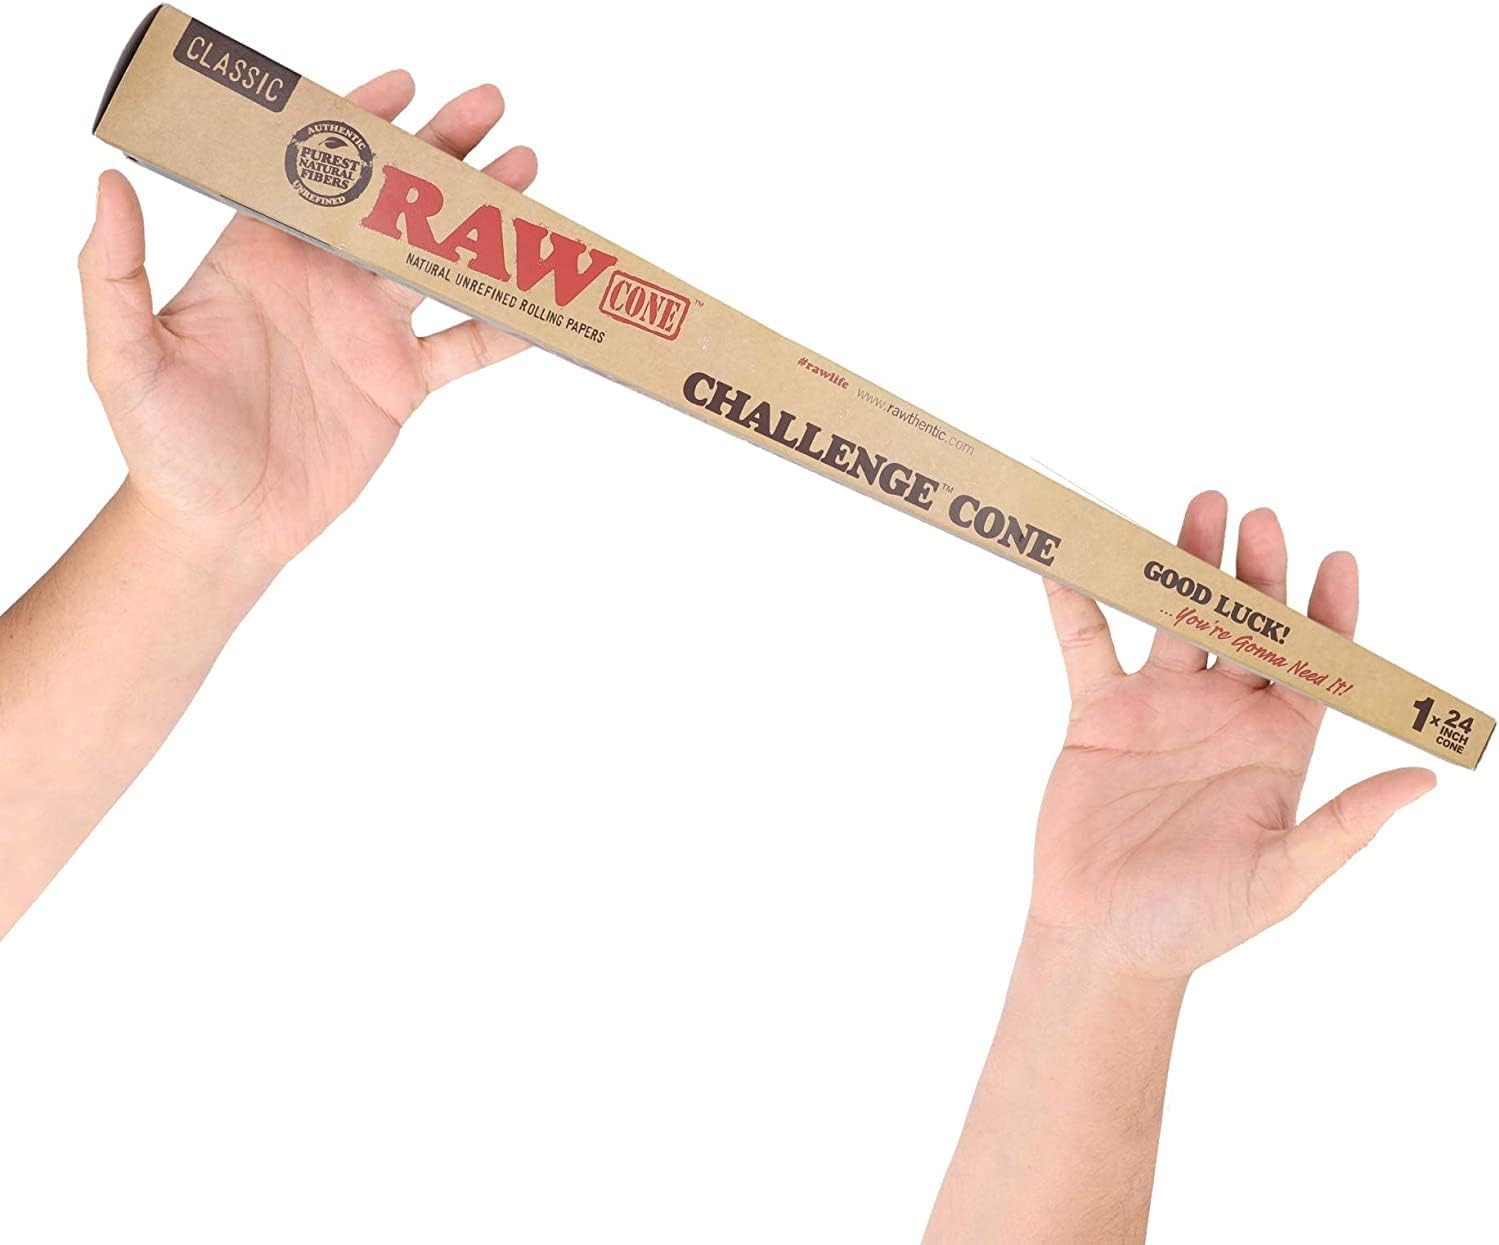 RAW Challenge Cone”24 Inch Cone” with Rolling Paper Depot Bracelet   price checker   price checker Description Gallery Reviews